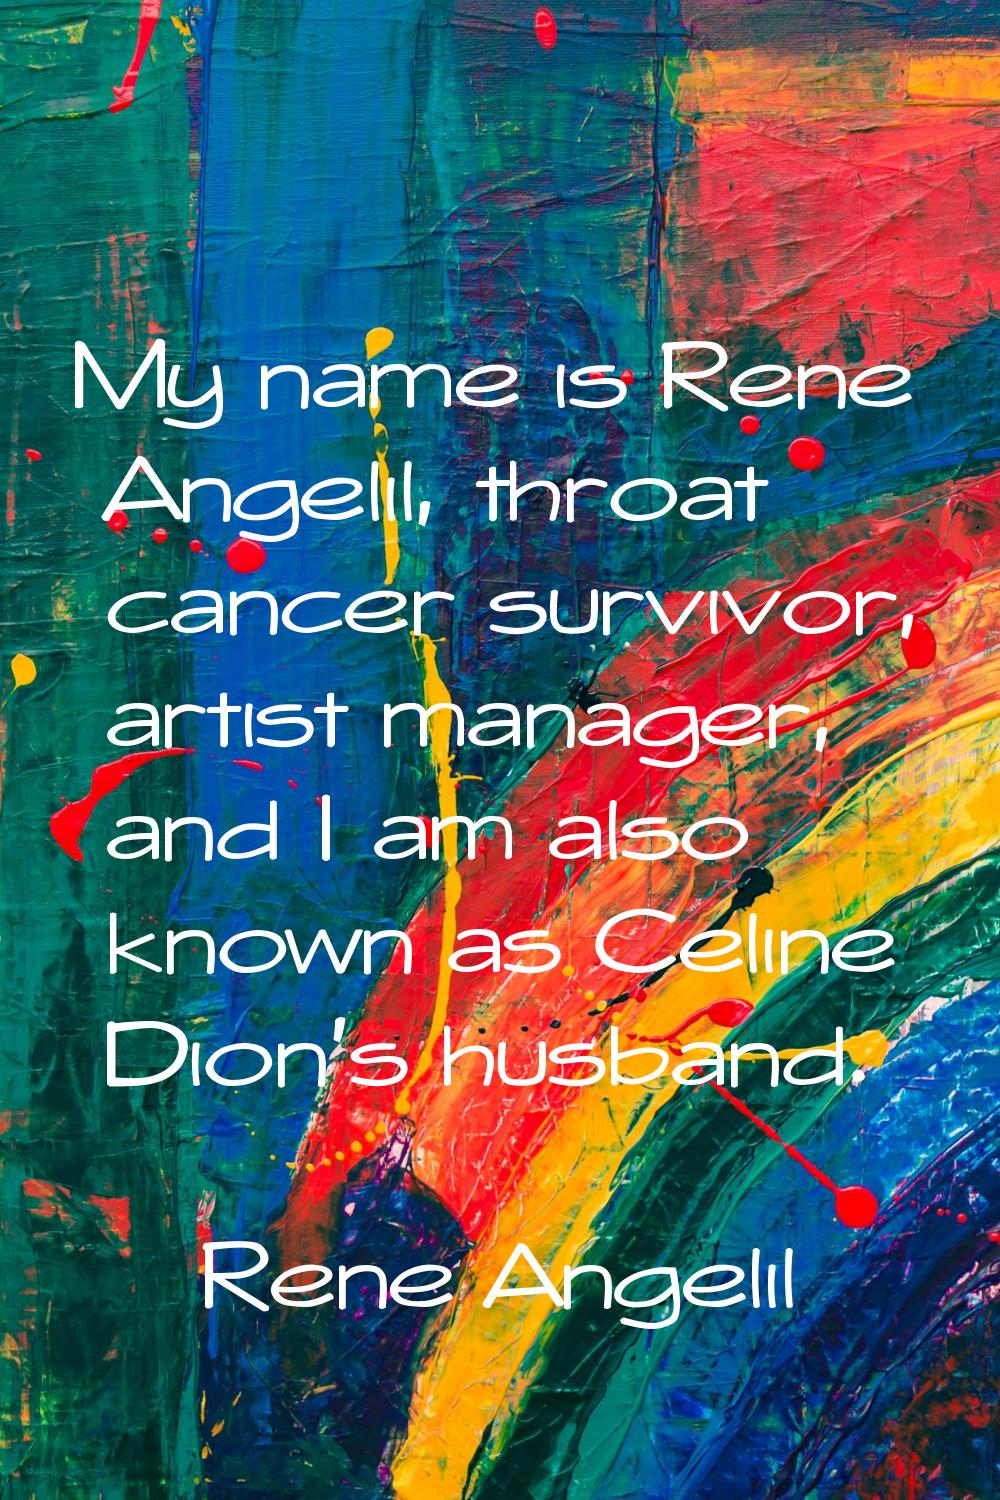 My name is Rene Angelil, throat cancer survivor, artist manager, and I am also known as Celine Dion